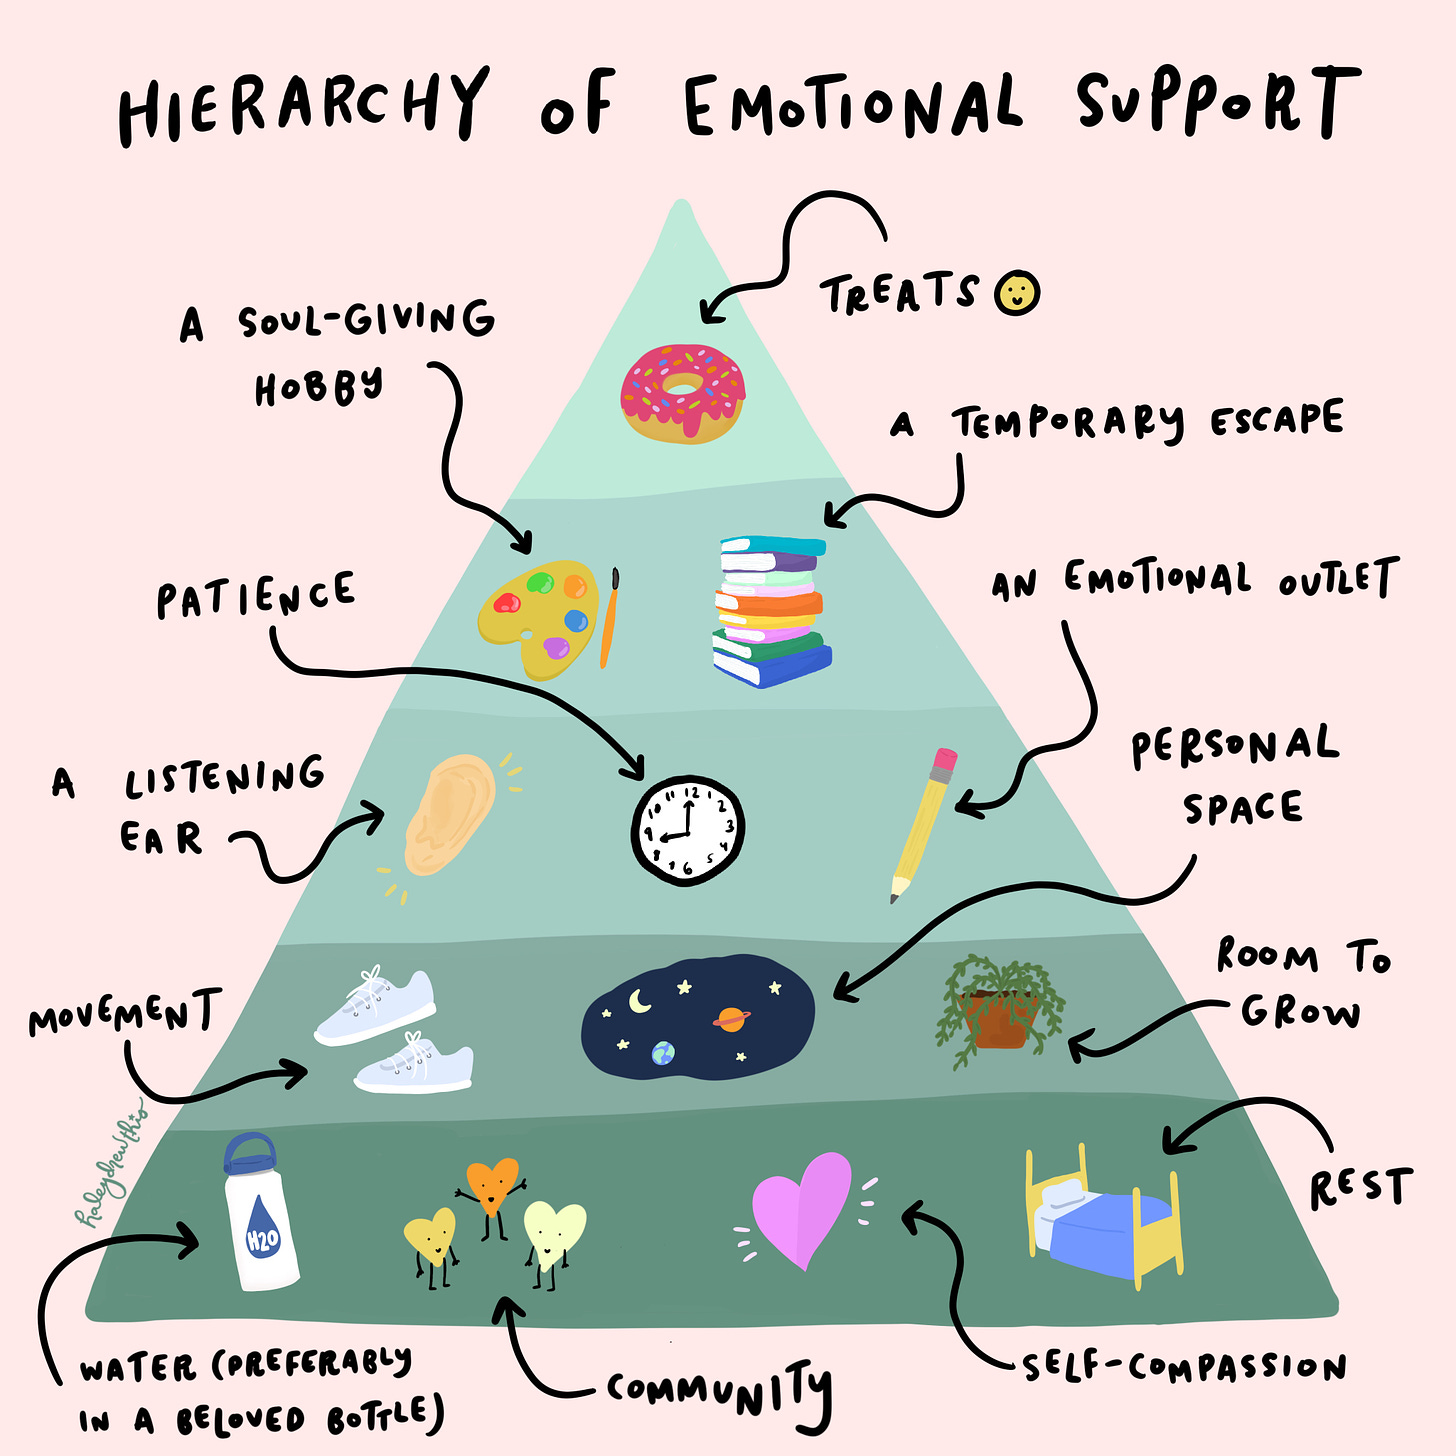 Image shows a hierarchy of emotional support. The pyramid itself is light green and includes: a soul-giving hobby, patience, a listening ear, movement, space, room to grow, an emotional outlet, a temporary escape, treats. 